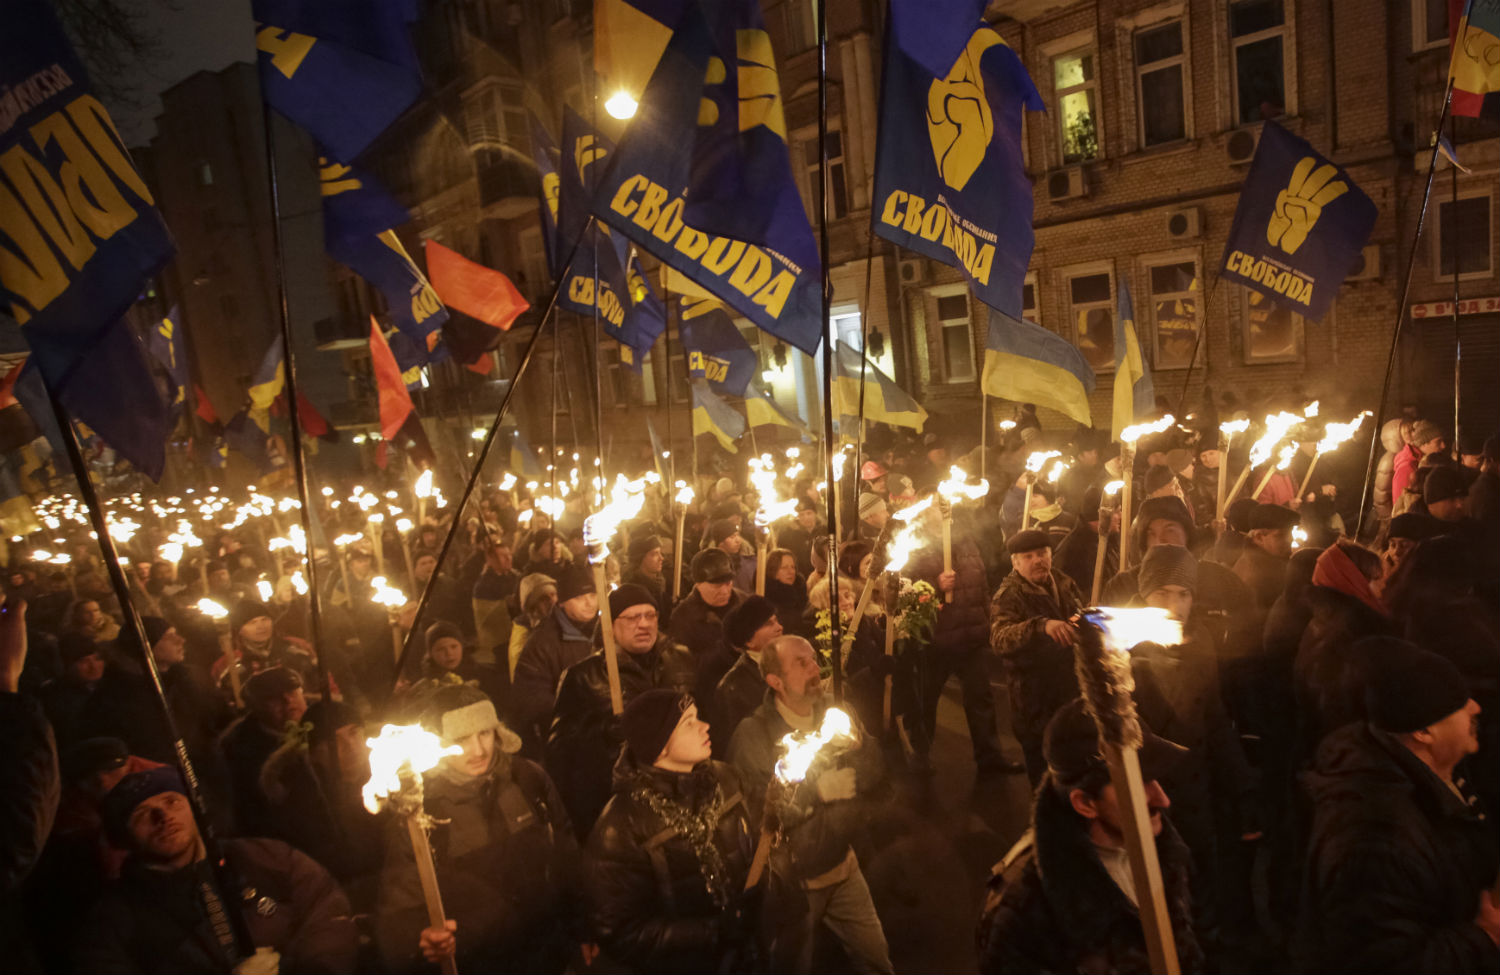 Ukraine’s Far Right Loses Big, but Europe’s Russian-Backed Fascists Make Major Gains